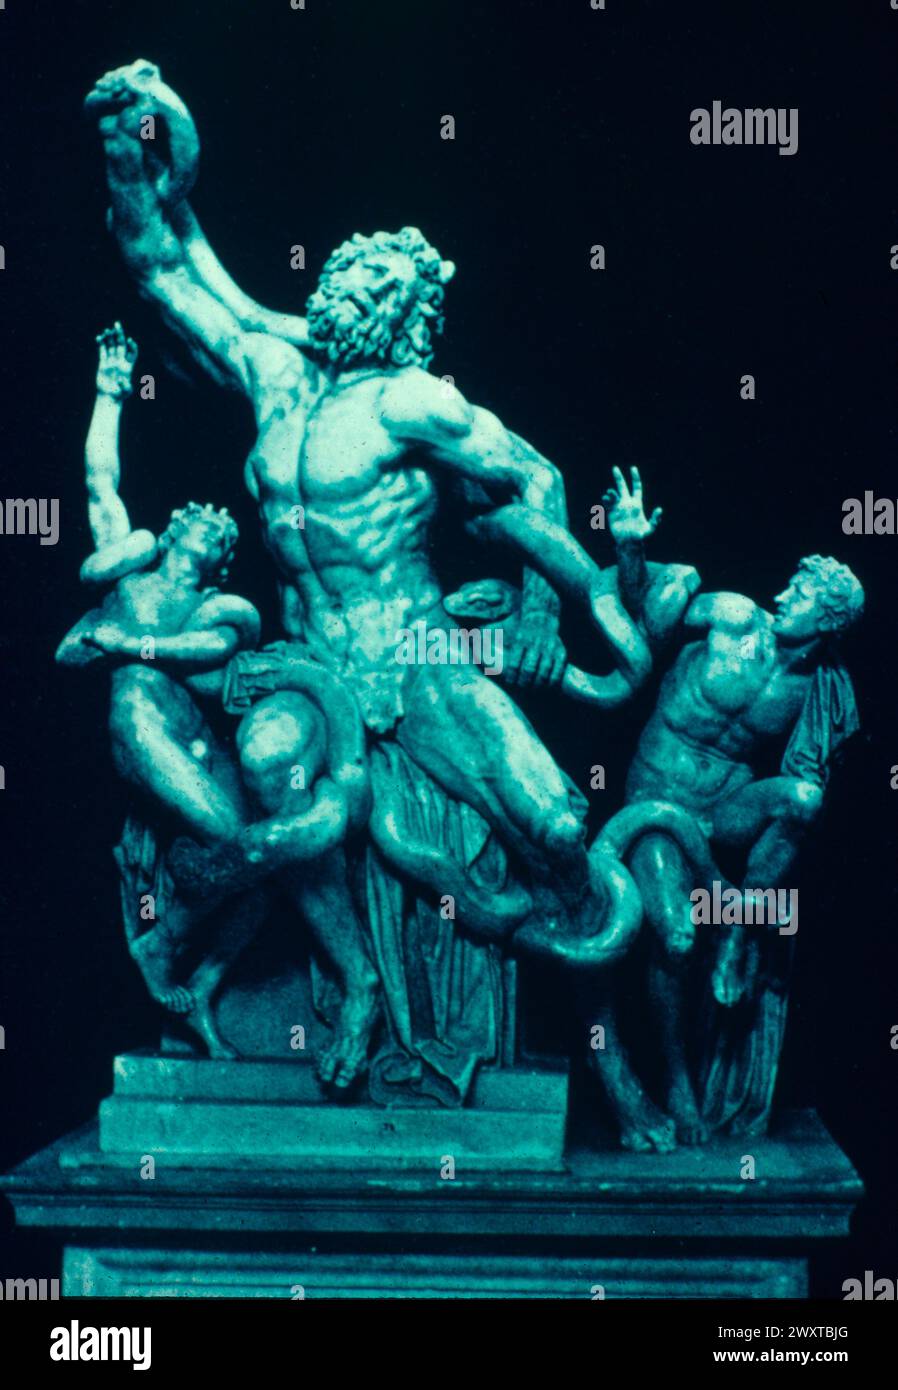 Laocoon, ancient sculpture by Greek artists, Greece 150 BC Stock Photo